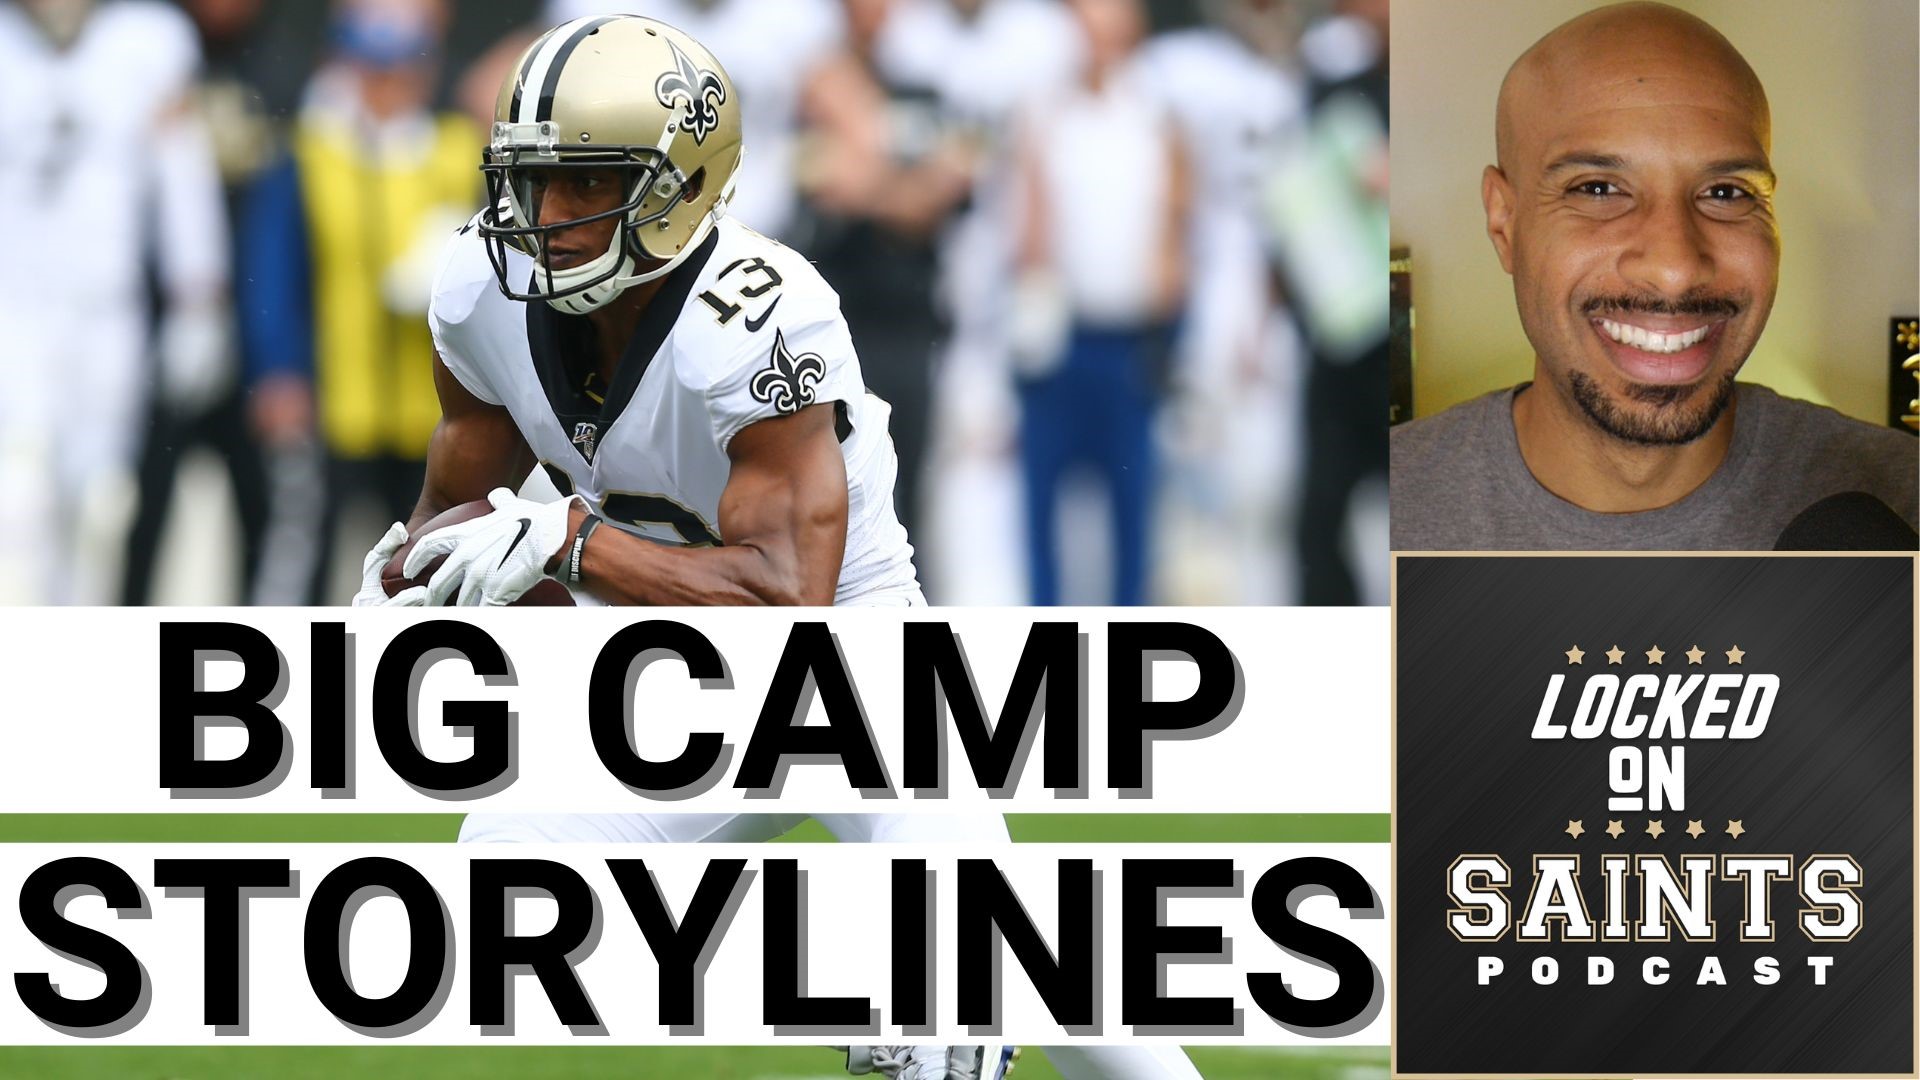 New Orleans Saints wide receiver additions like Michael Thomas, Chris Olave, and Jarvis Landry generate excitement ahead of NFL training camp.